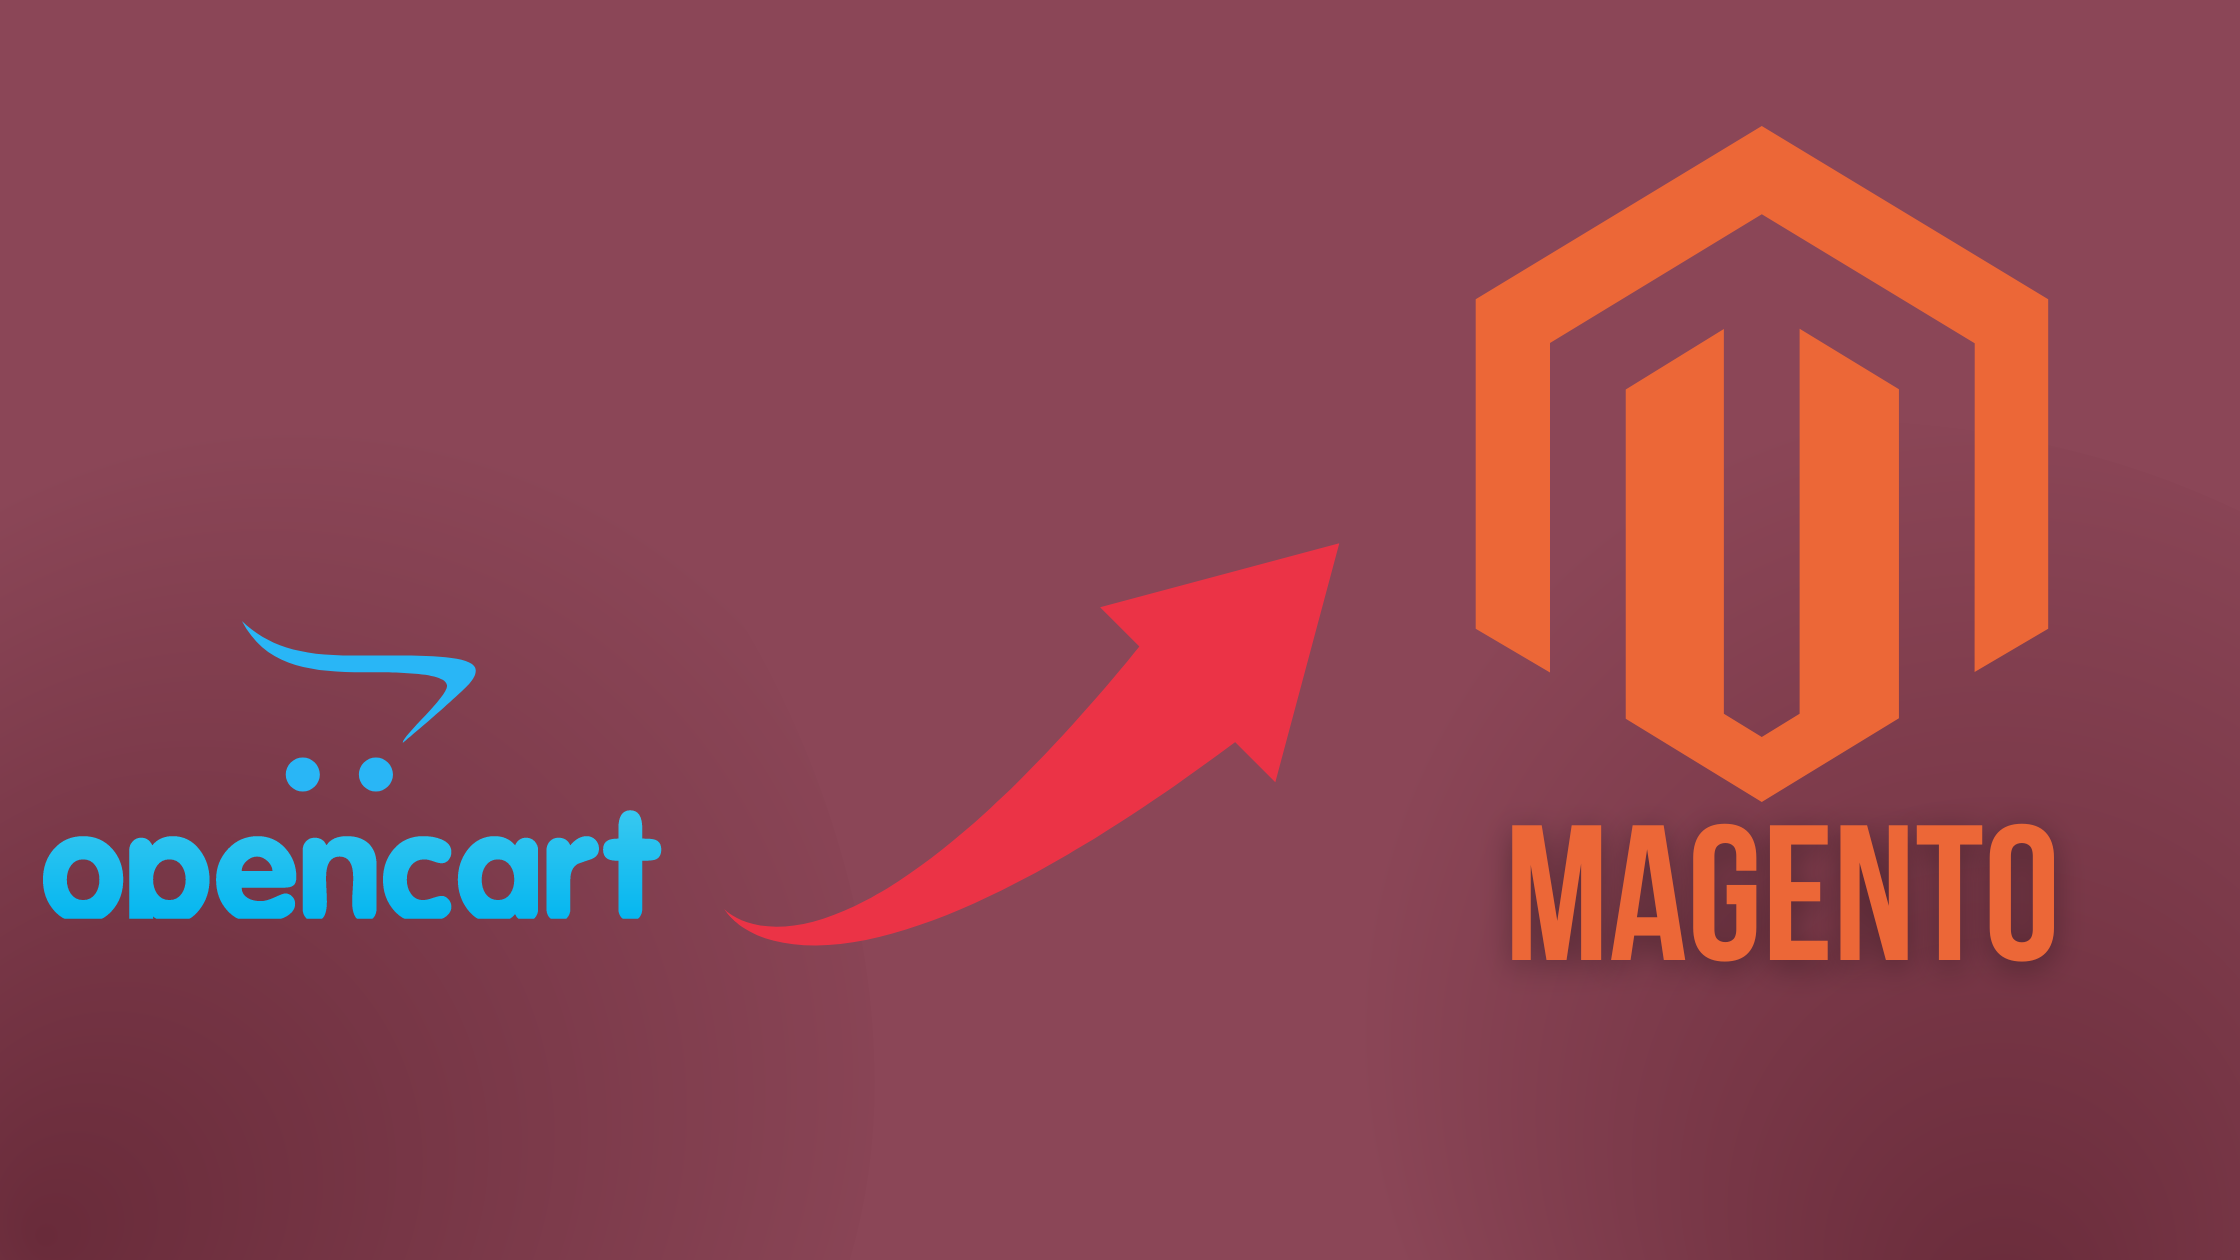 Things You Should Know To Migrate From OpenCart To Magento